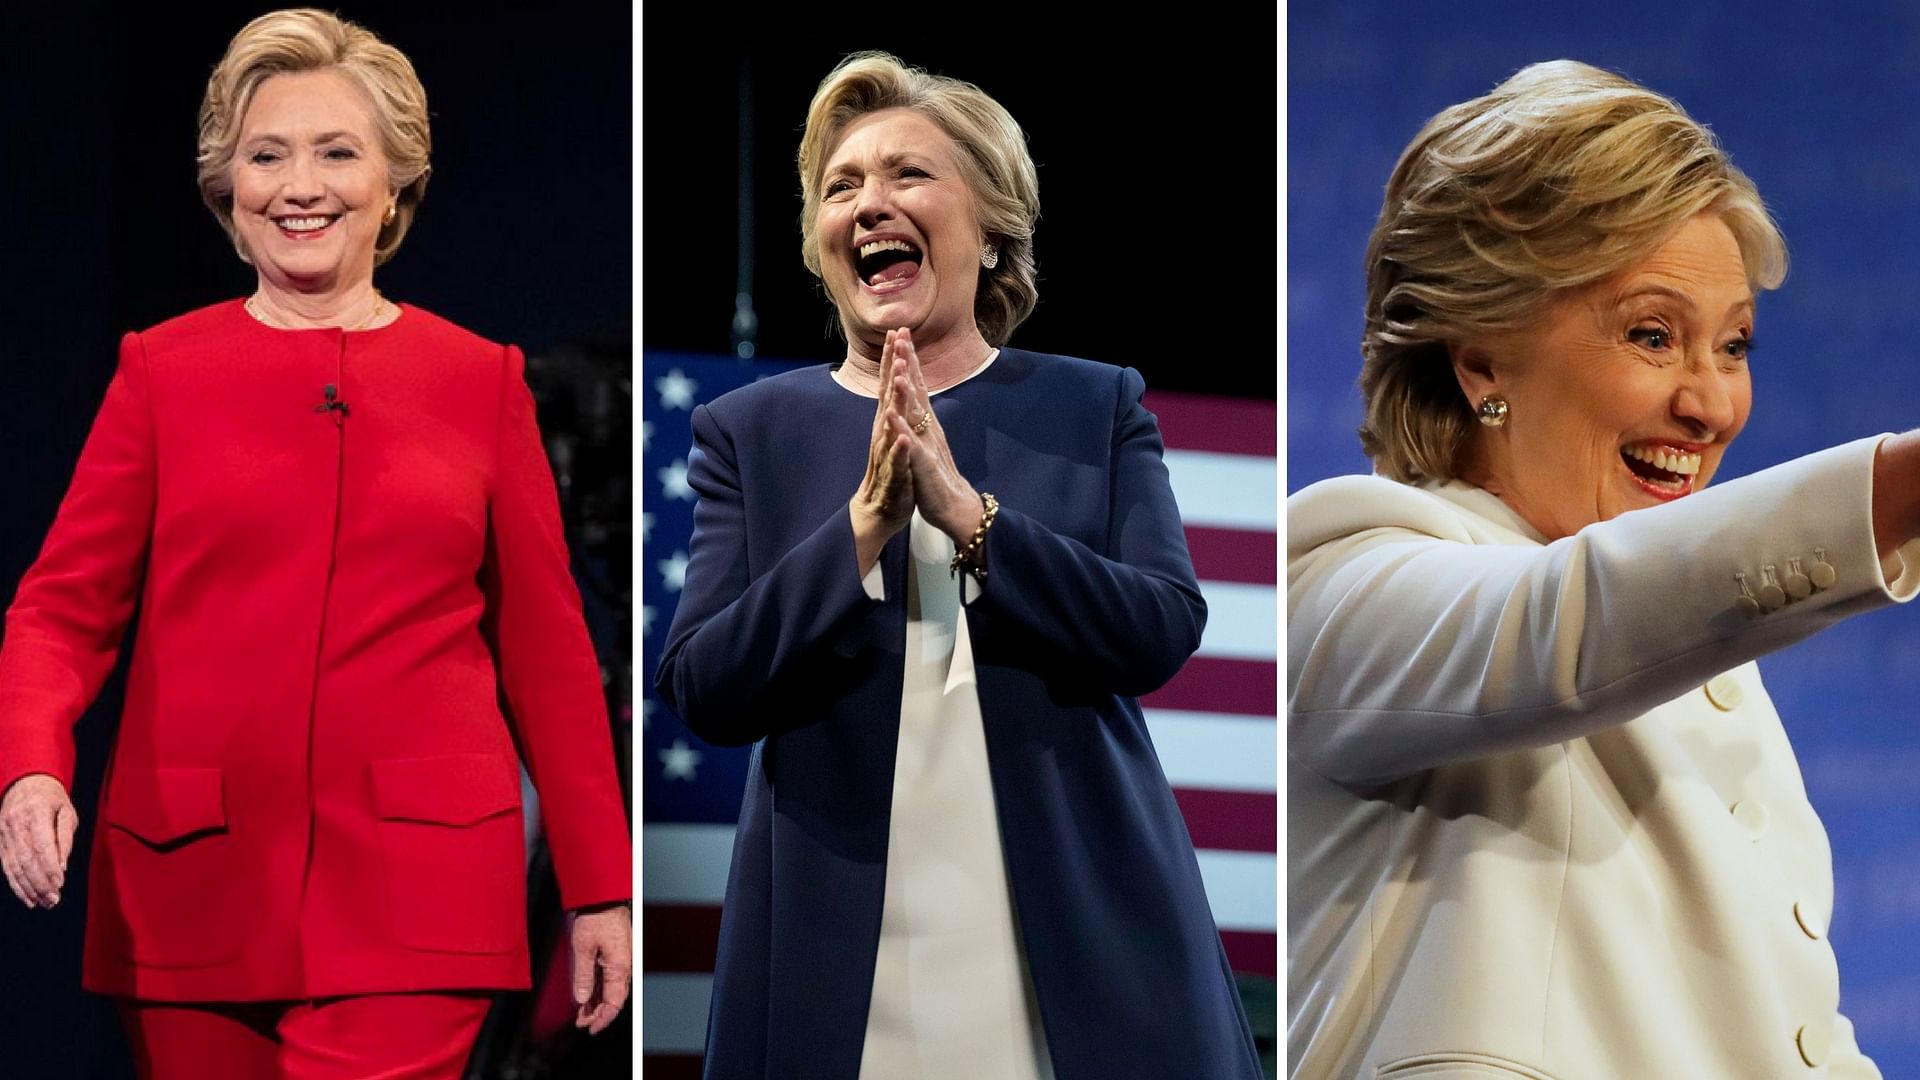 Hillary Clinton and her debate night outfits. (Photo: Altered by <b>The Quint</b>)